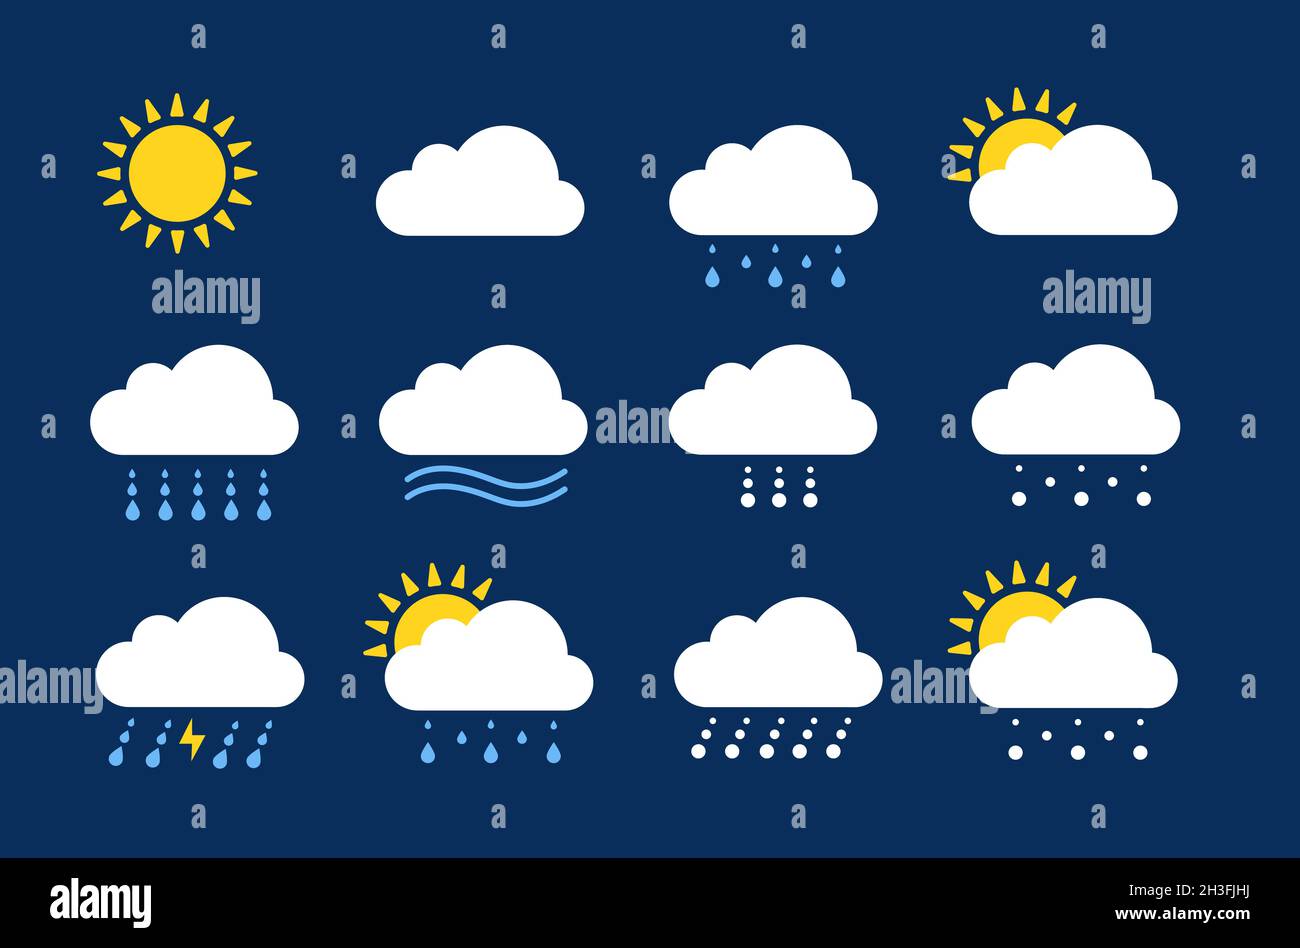 Sunny and rainy day. Weather forecast icon. Meteorological sign